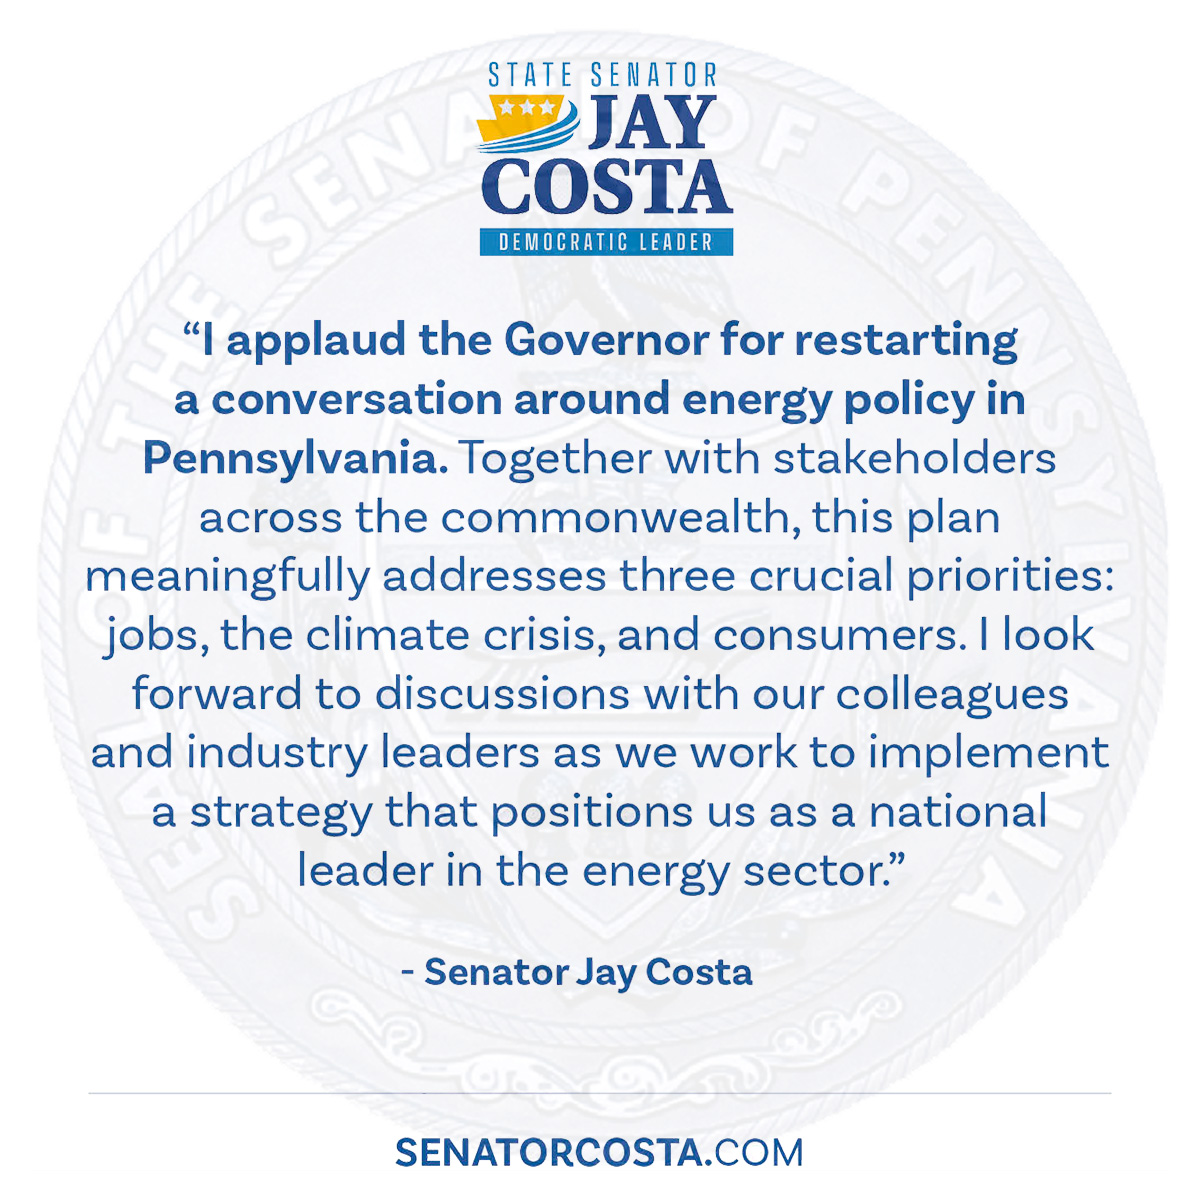  “I applaud the Governor for restarting a conversation around energy policy in Pennsylvania. Together with stakeholders across the commonwealth, this plan meaningfully addresses three crucial priorities: jobs, the climate crisis, and consumers. I look forward to discussions with our colleagues and industry leaders as we work to implement a strategy that positions us as a national leader in the energy sector.”